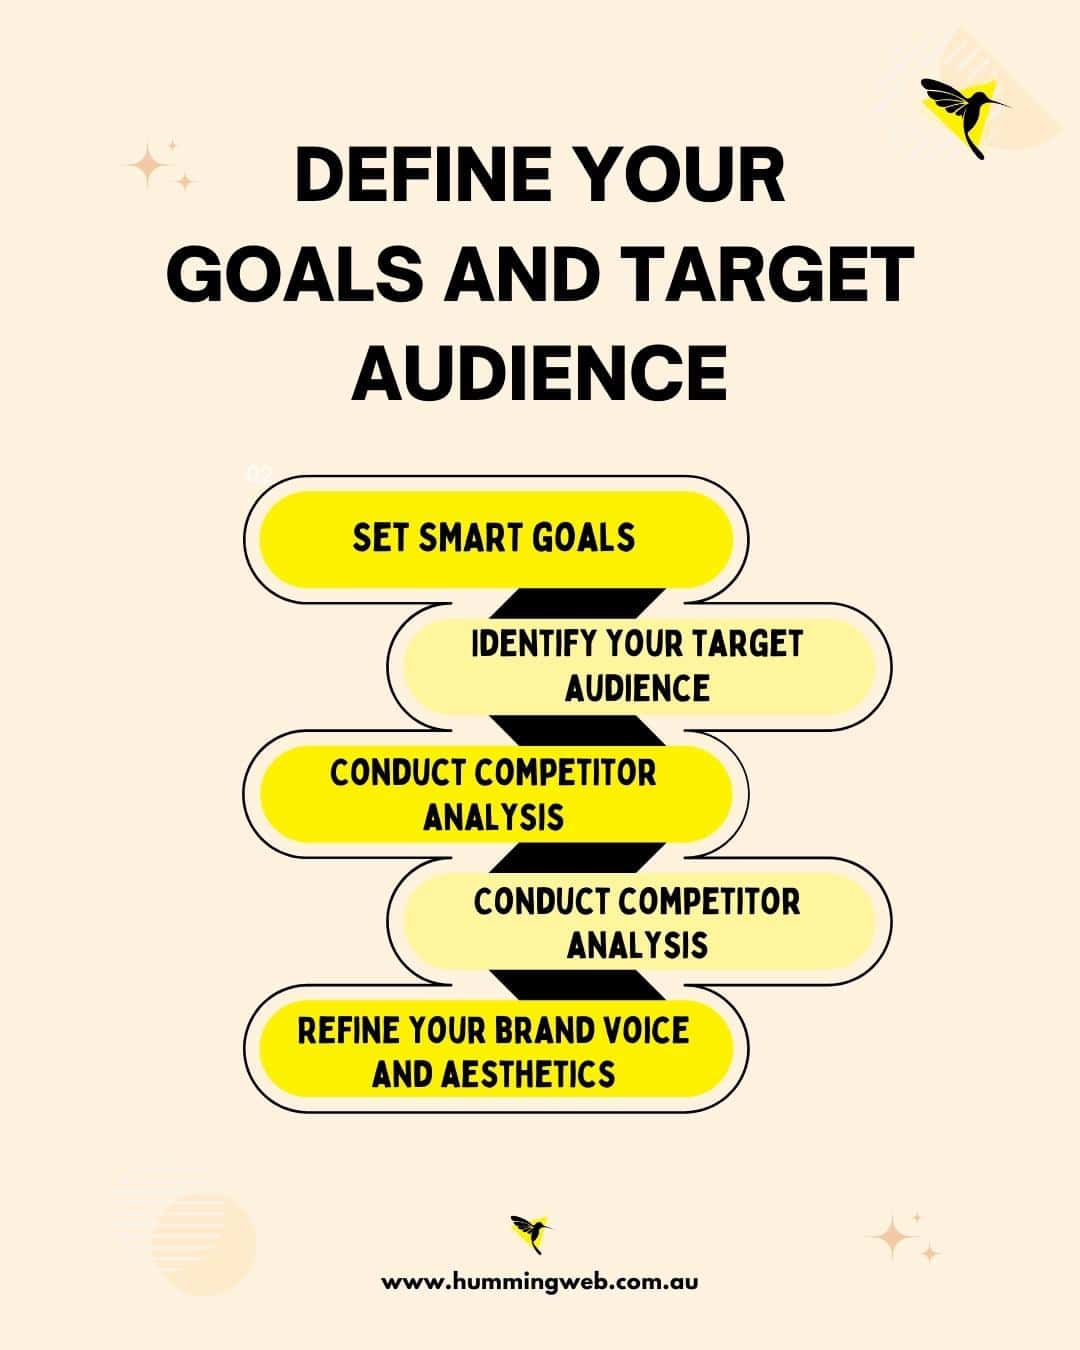 instagram marketing on defining your goal and target audience 